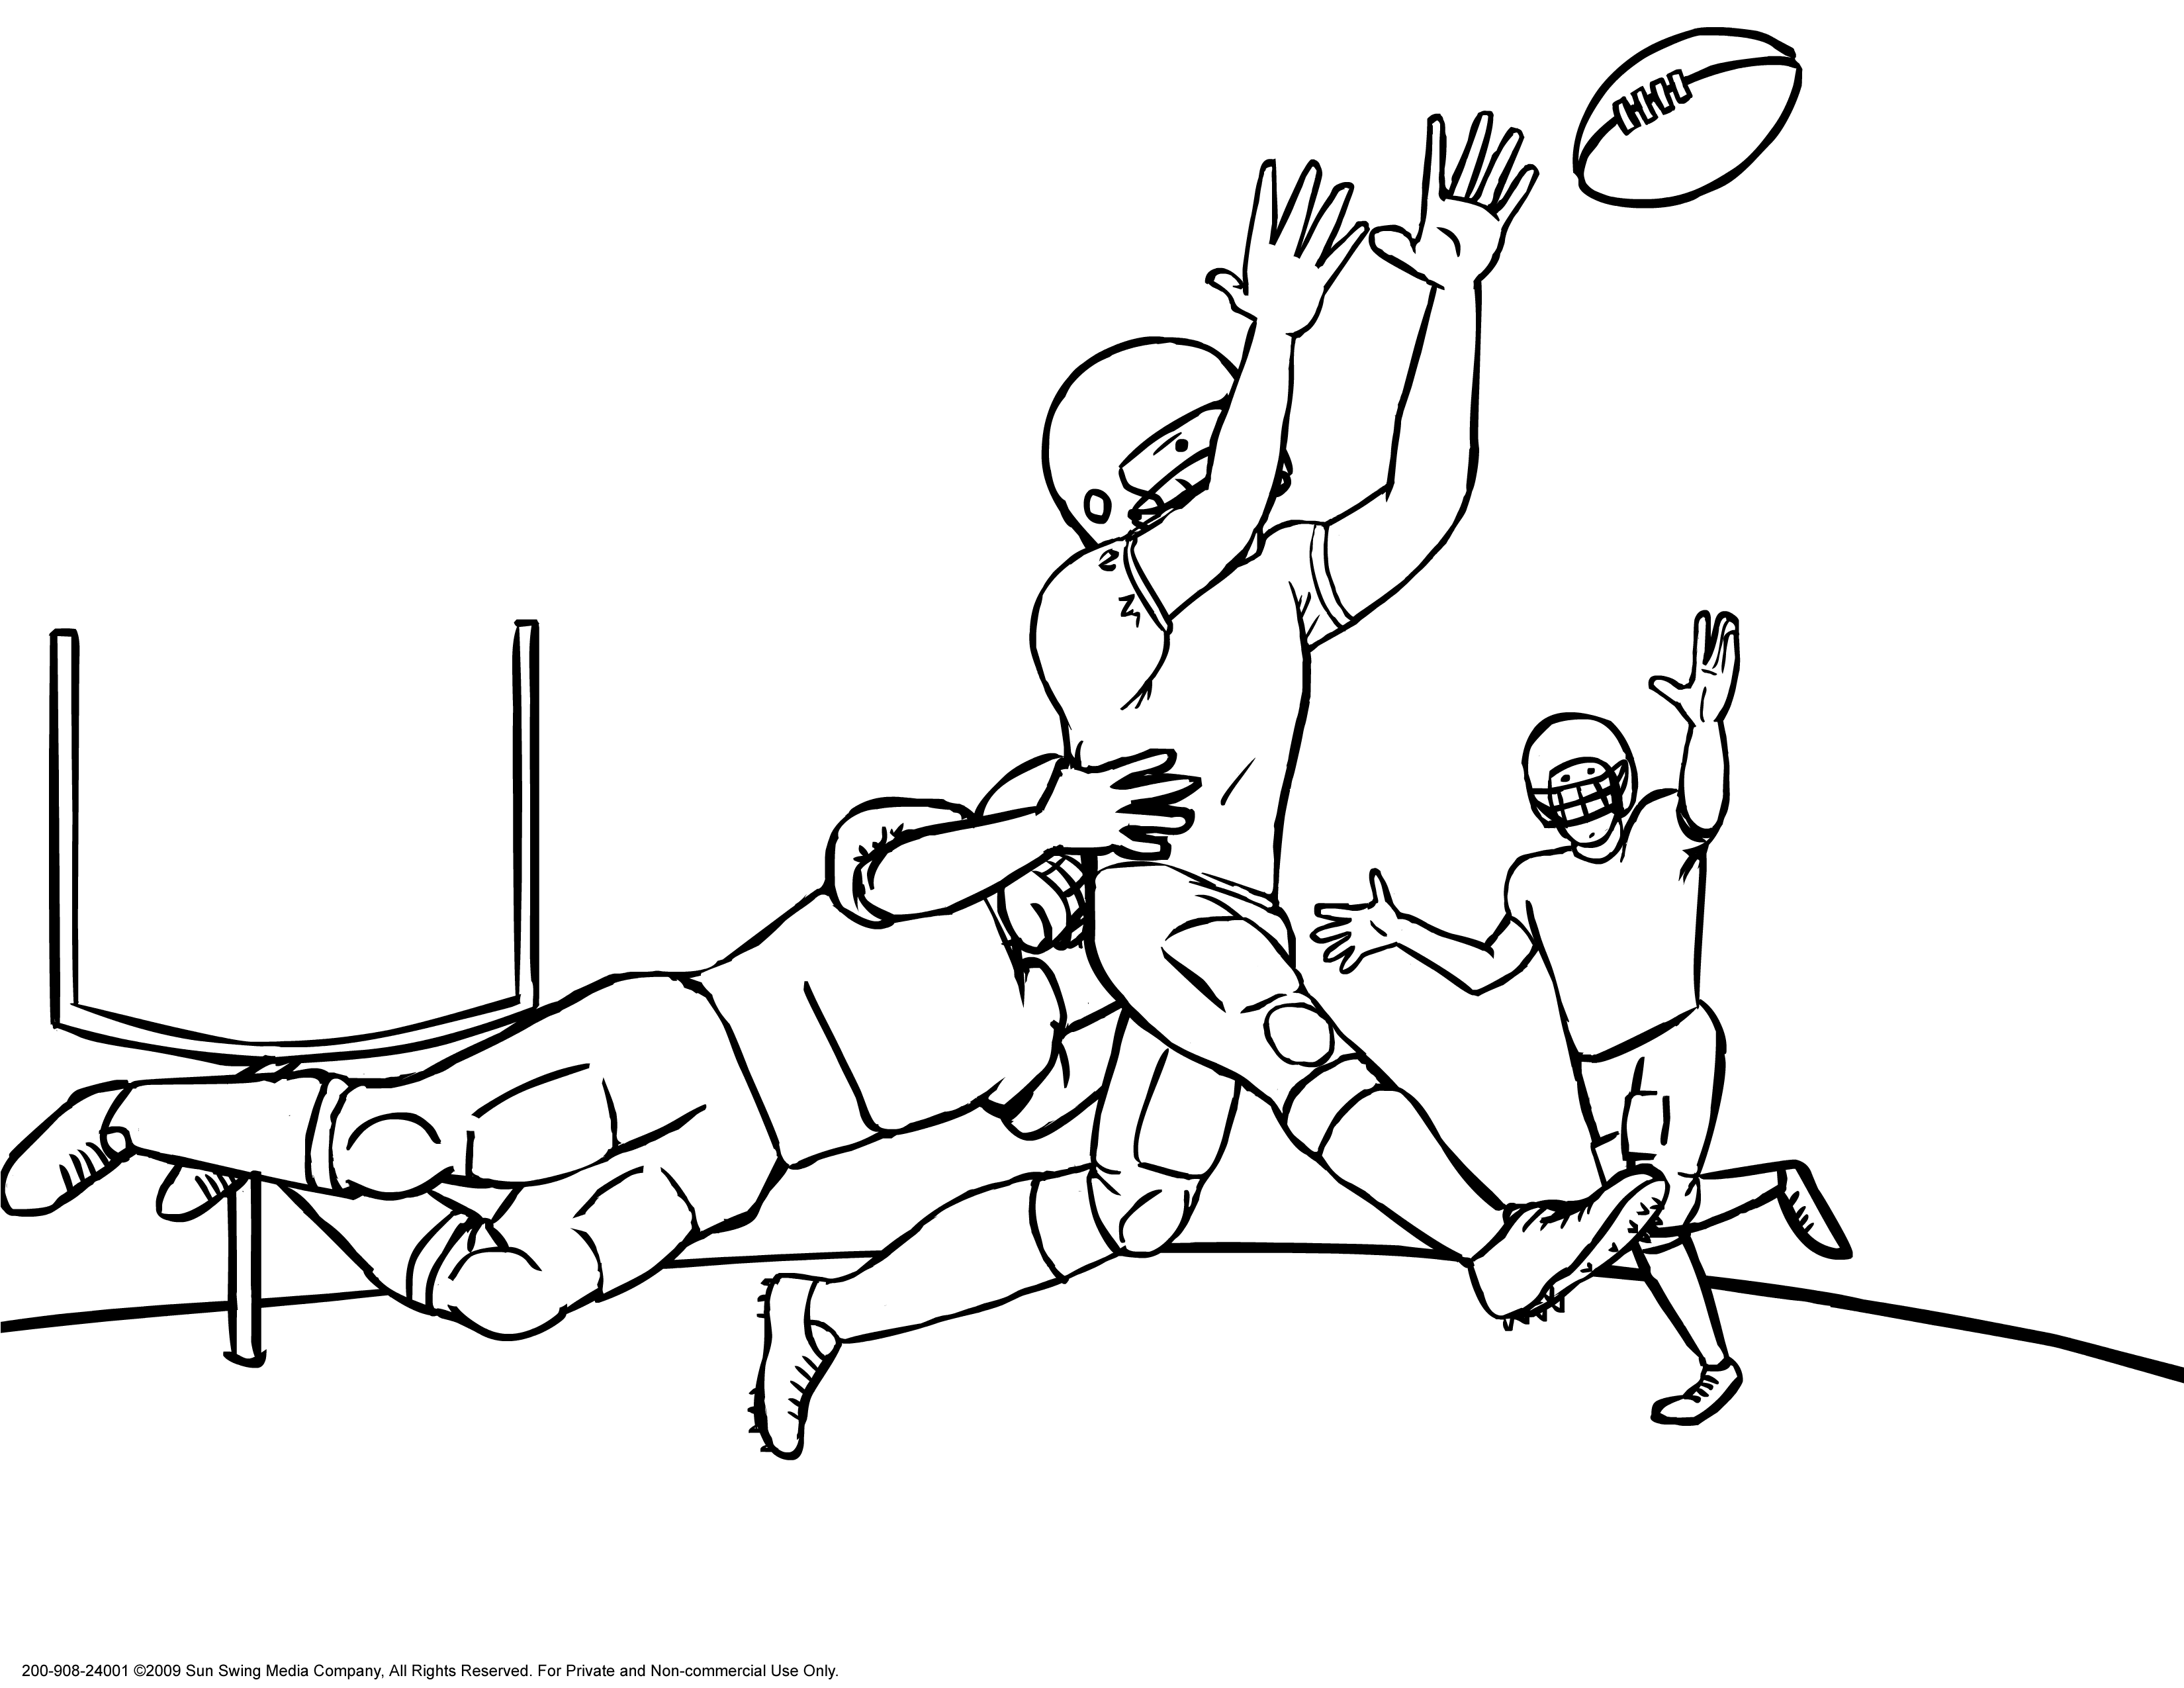 Super Bowl 2017 Coloring Pages - Coloring Home